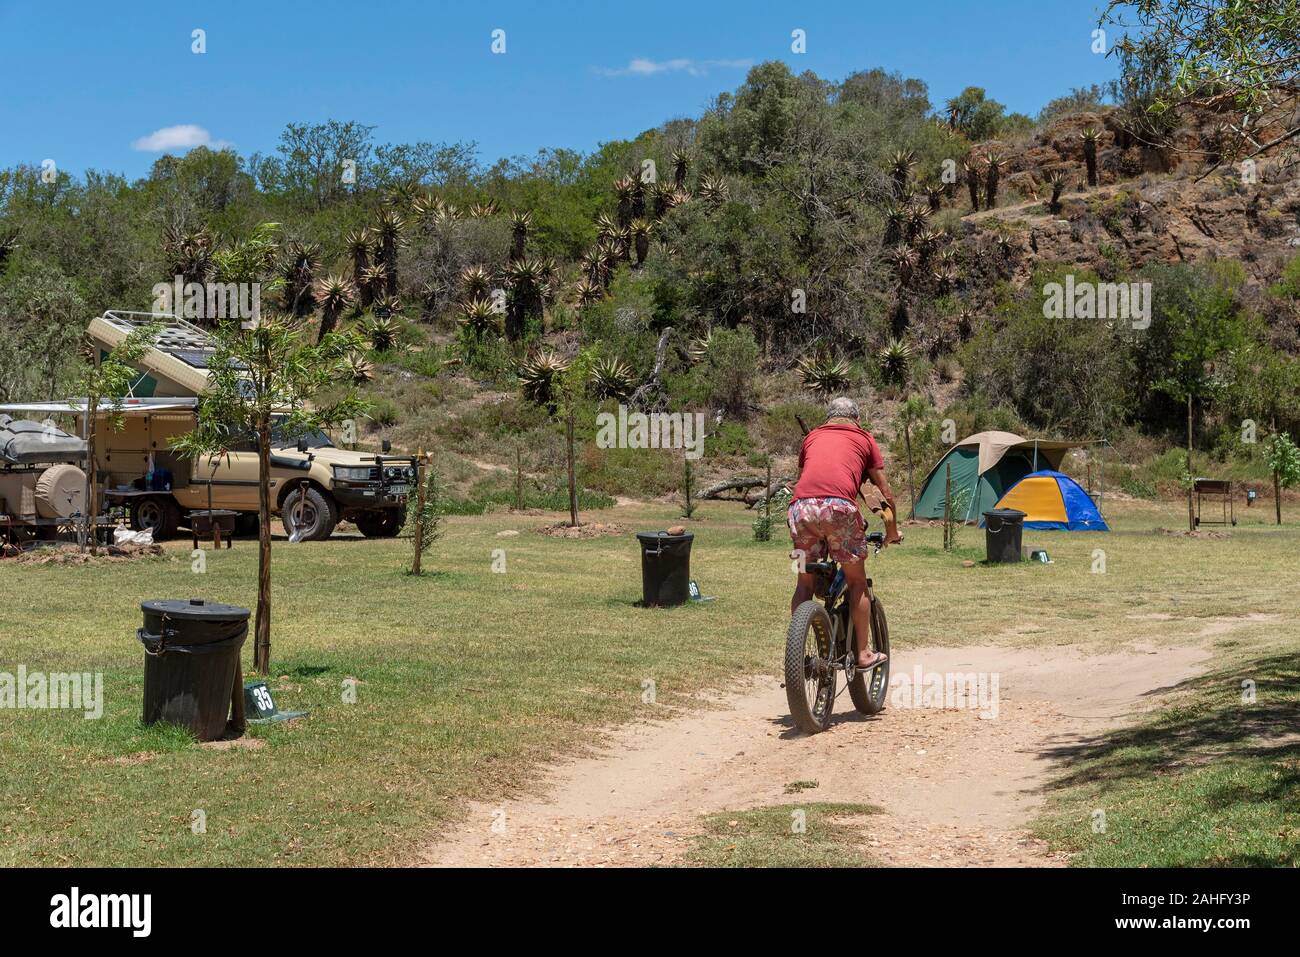 Swellendam, Western Cape, South Africa, December 2019. Couple with cycles on a campsite along the Garden Route at Swellendam, South Africa Stock Photo